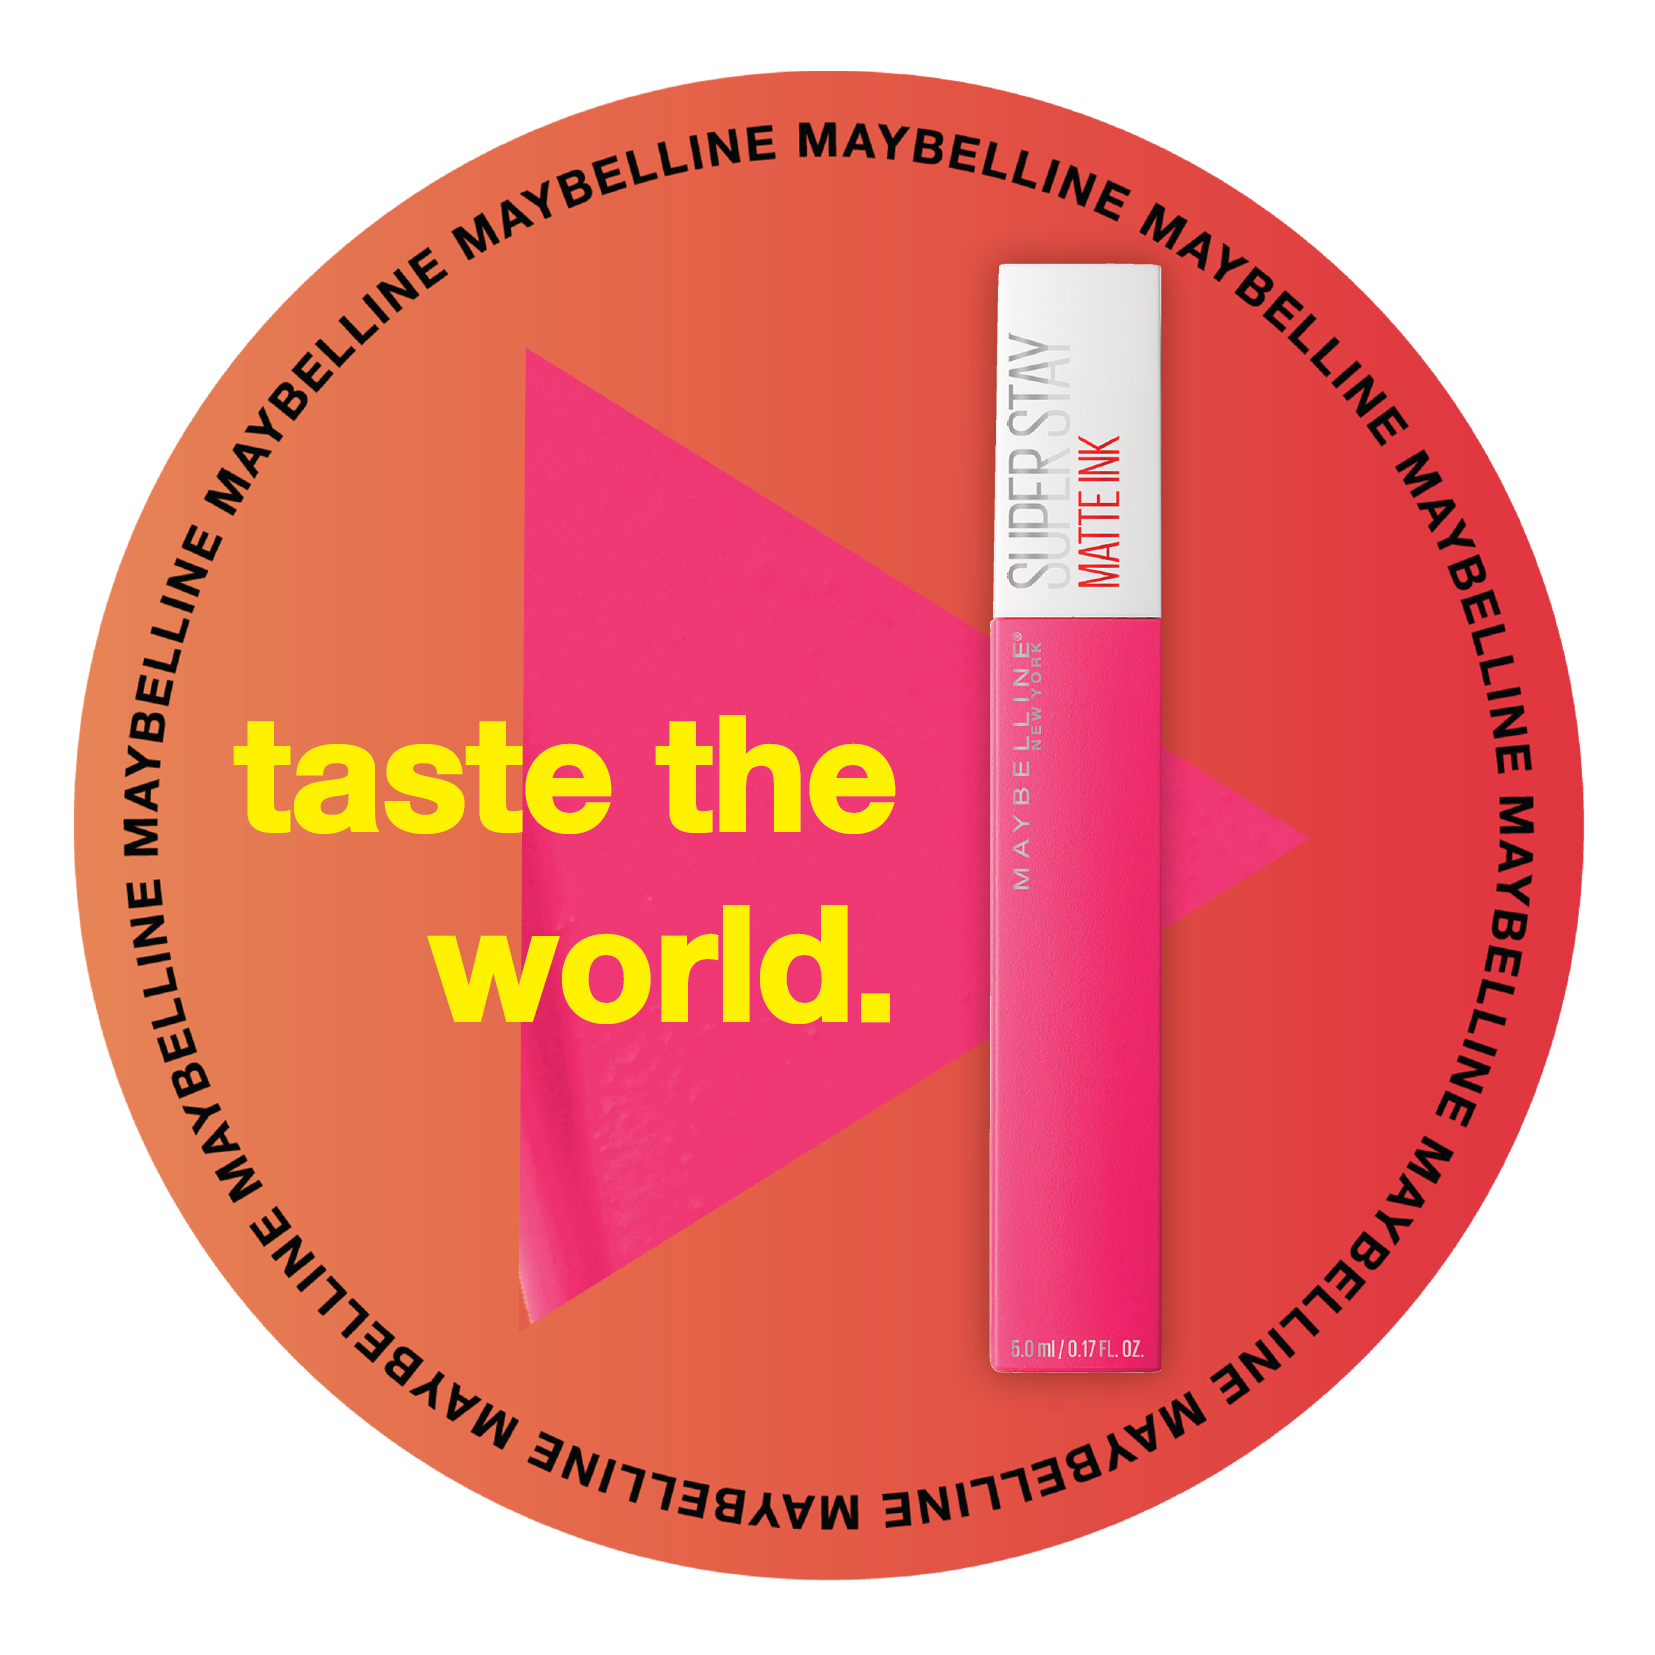 MAYBELLINE NEW YORK BRINGS COLOR TO LIFE WITH ITS MAKEUP PRODUCTS